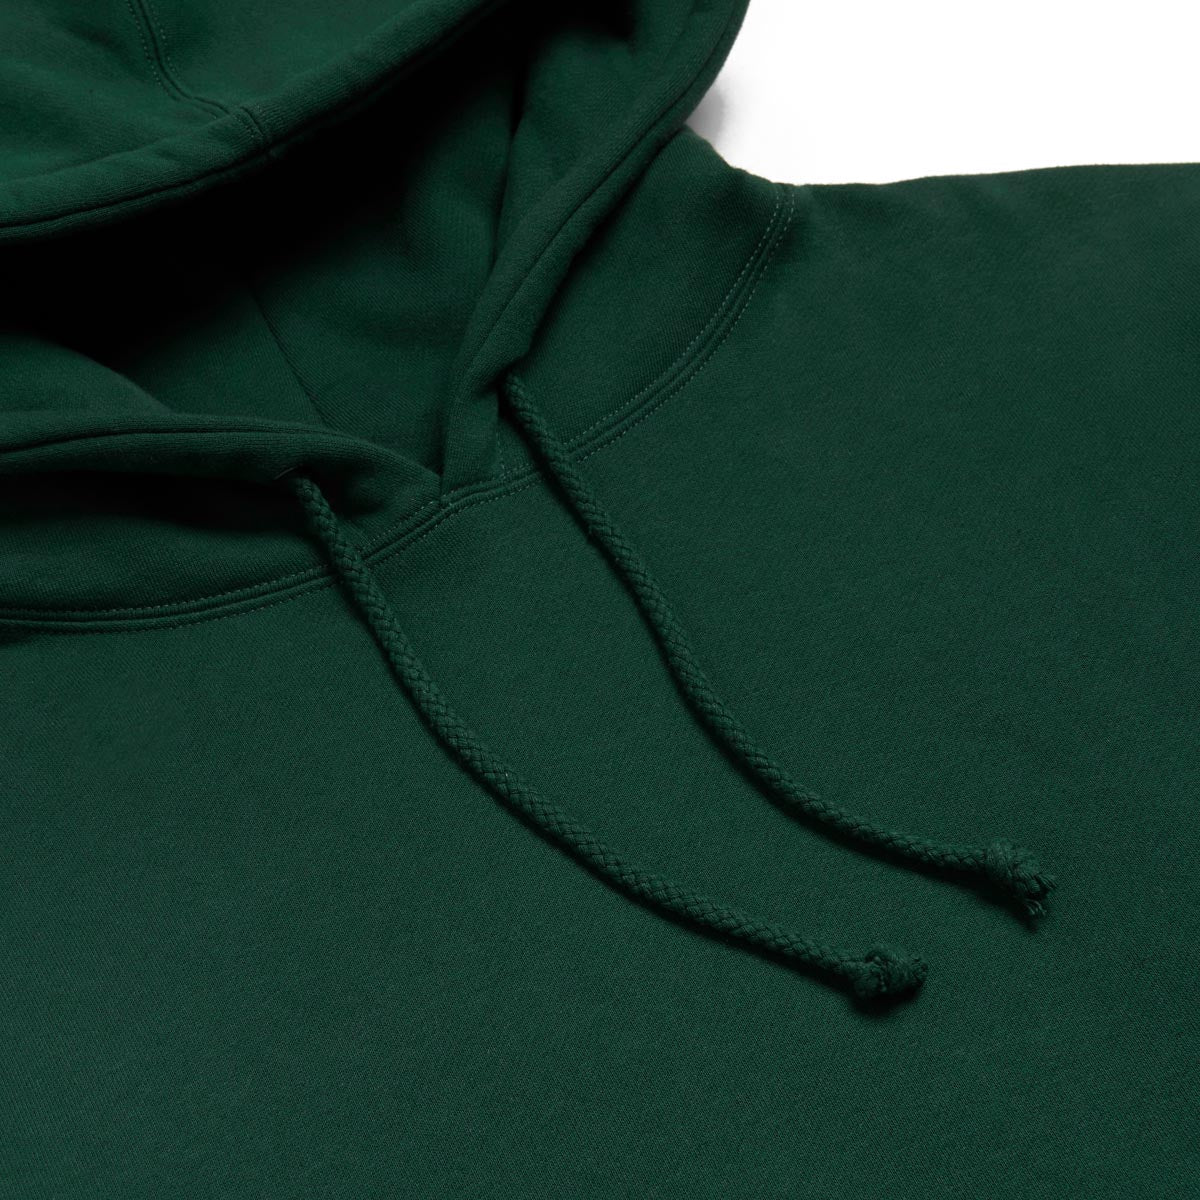 CCS Staple Pullover Hoodie - Green image 2